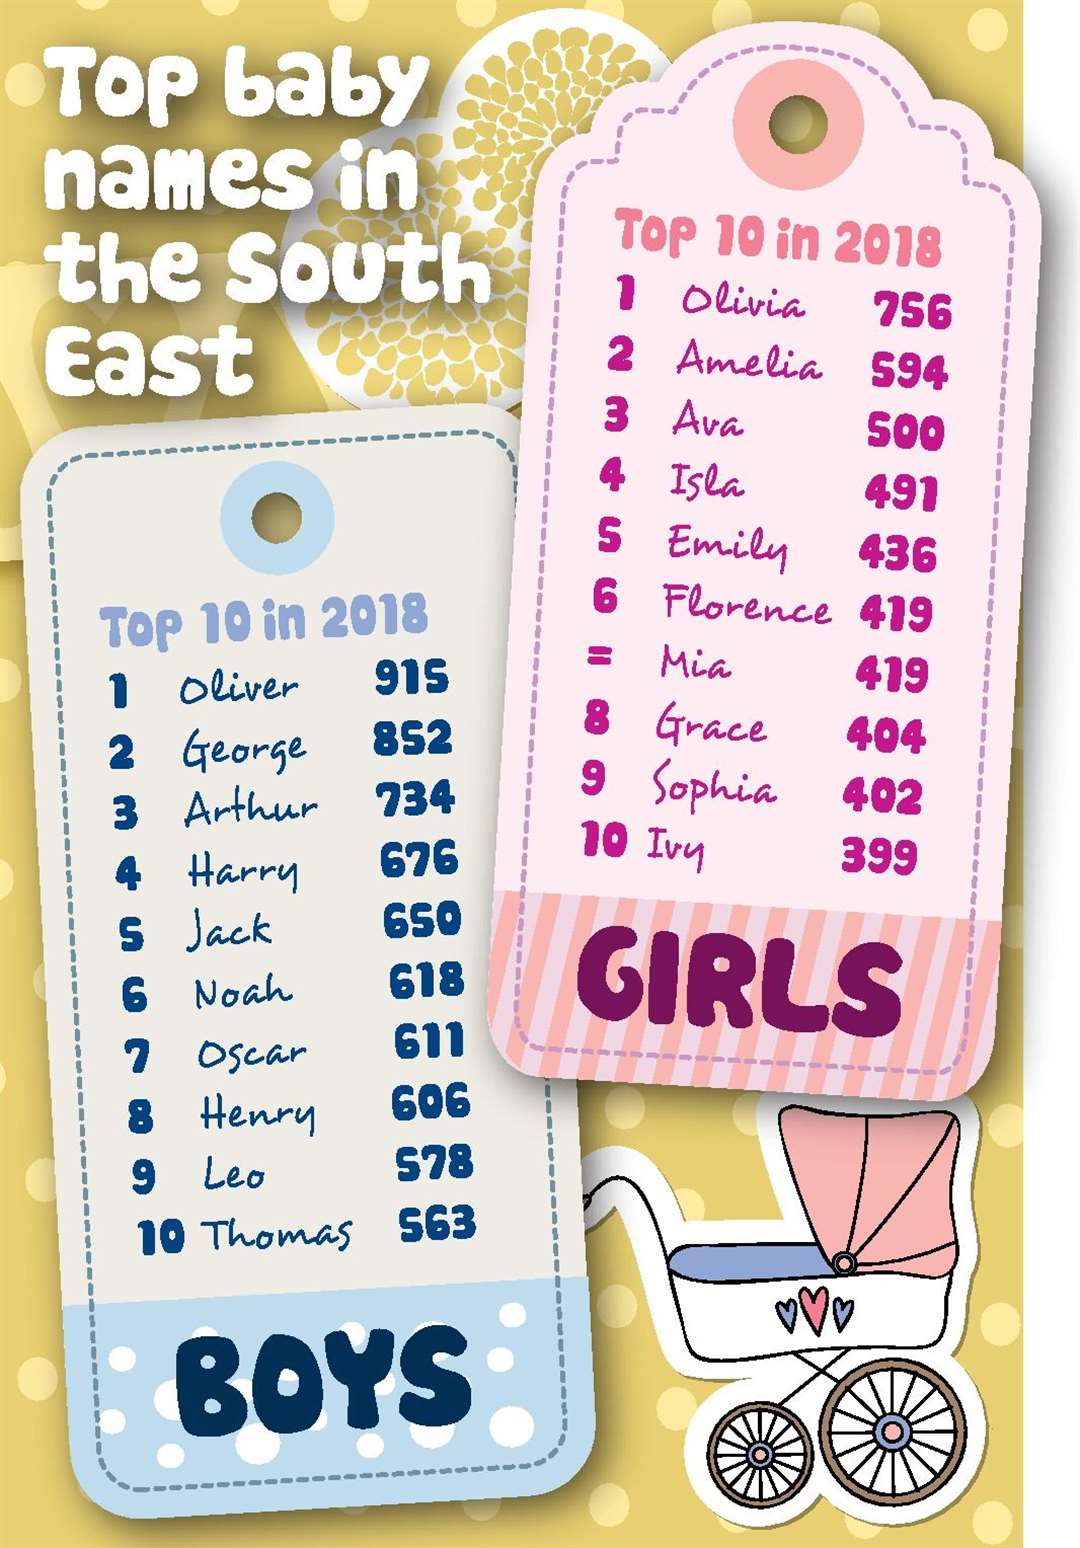 The top baby names for 2018 in the South East